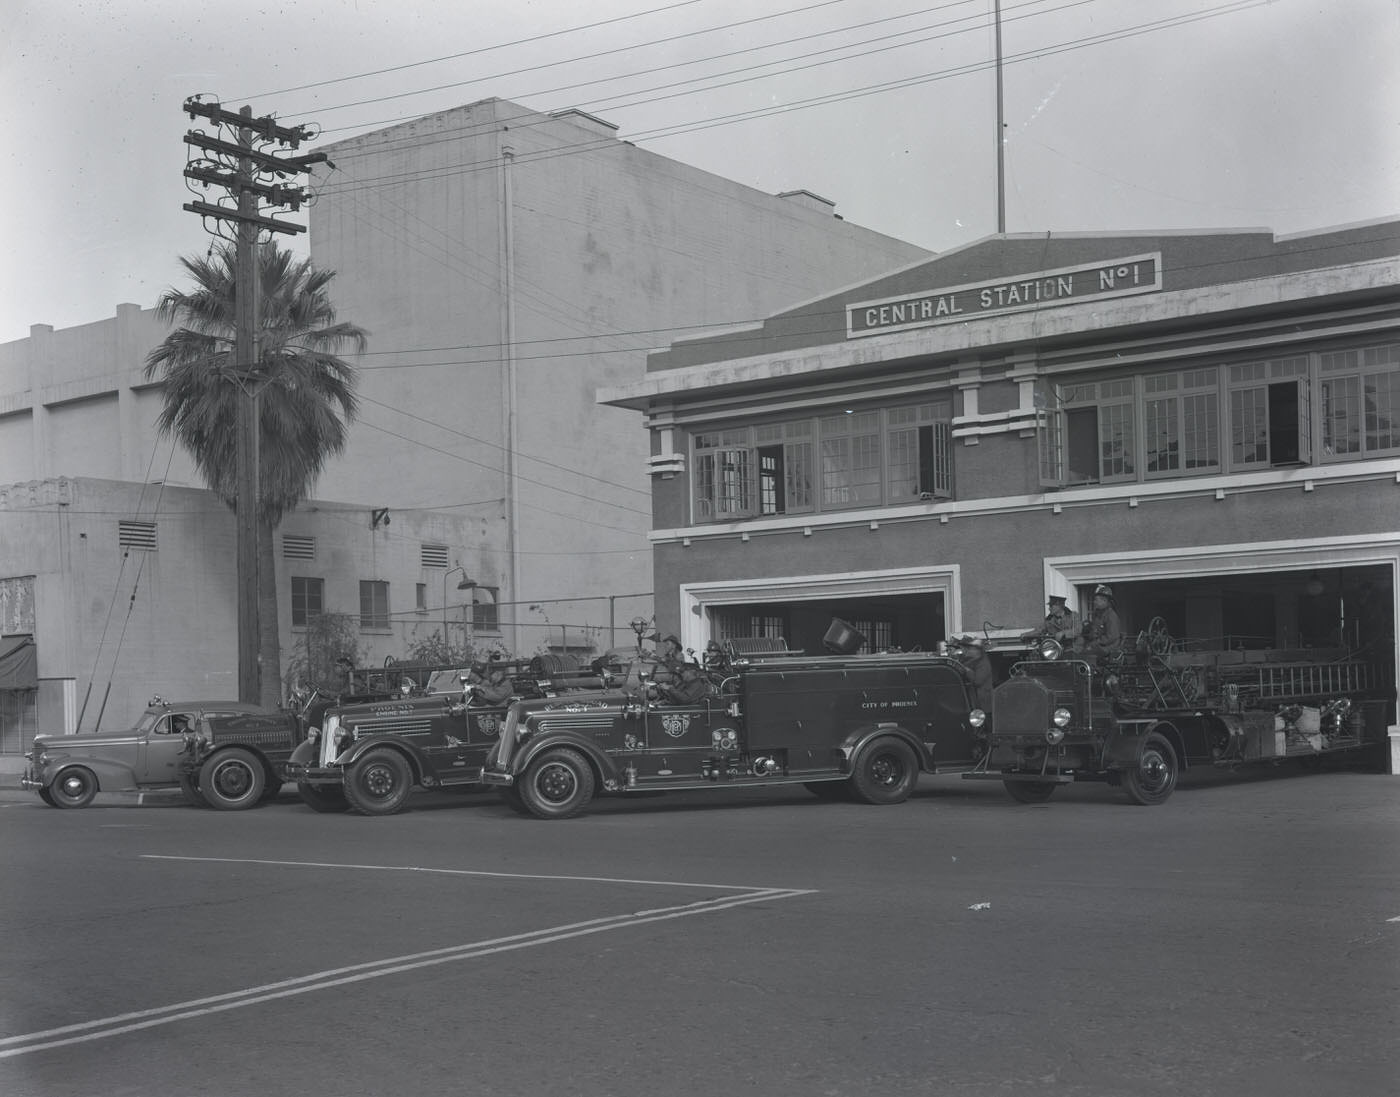 Phoenix Fire Department Central Station #1 with Fire Trucks Parked in Front, 1930s